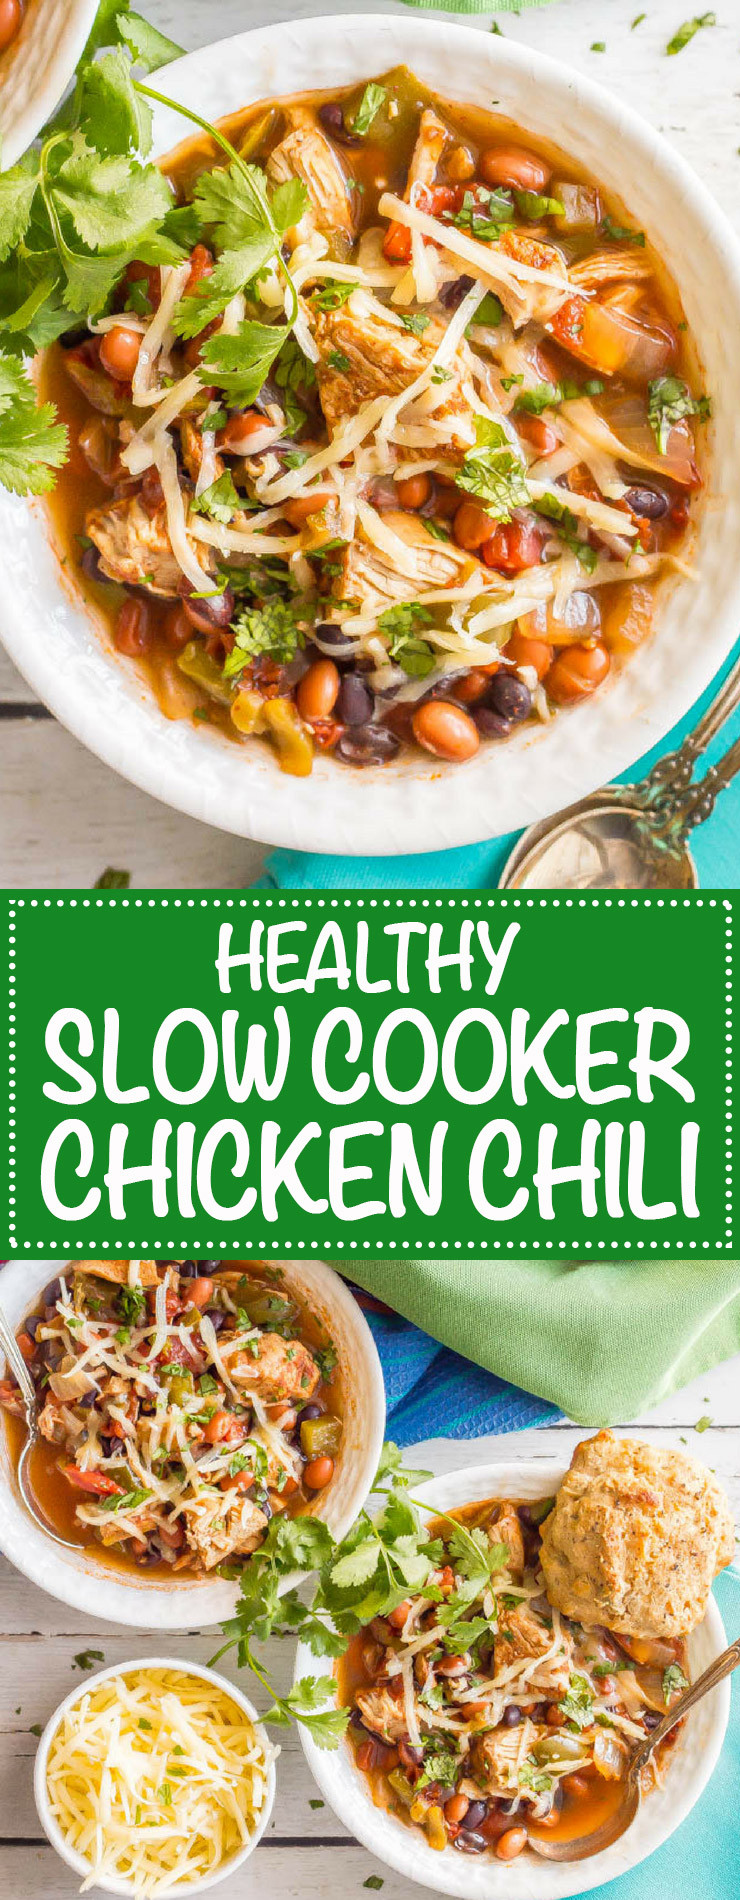 Healthy Chicken Chili Slow Cooker
 Healthy slow cooker chicken chili Family Food on the Table